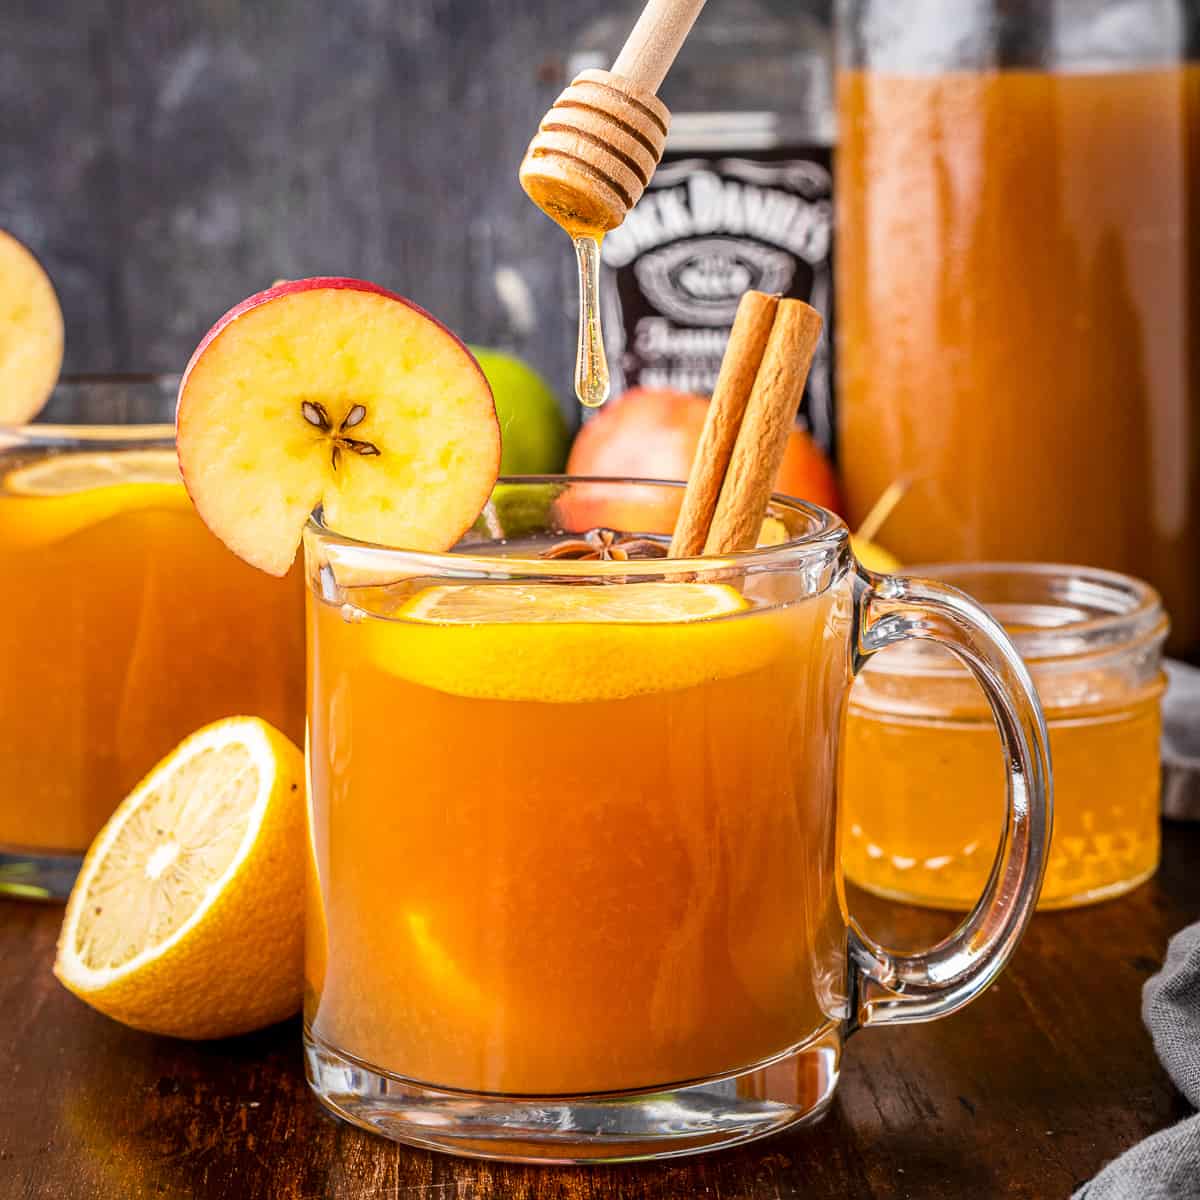 https://www.thecookierookie.com/wp-content/uploads/2021/10/featured-apple-cider-hot-toddy-recipe.jpg